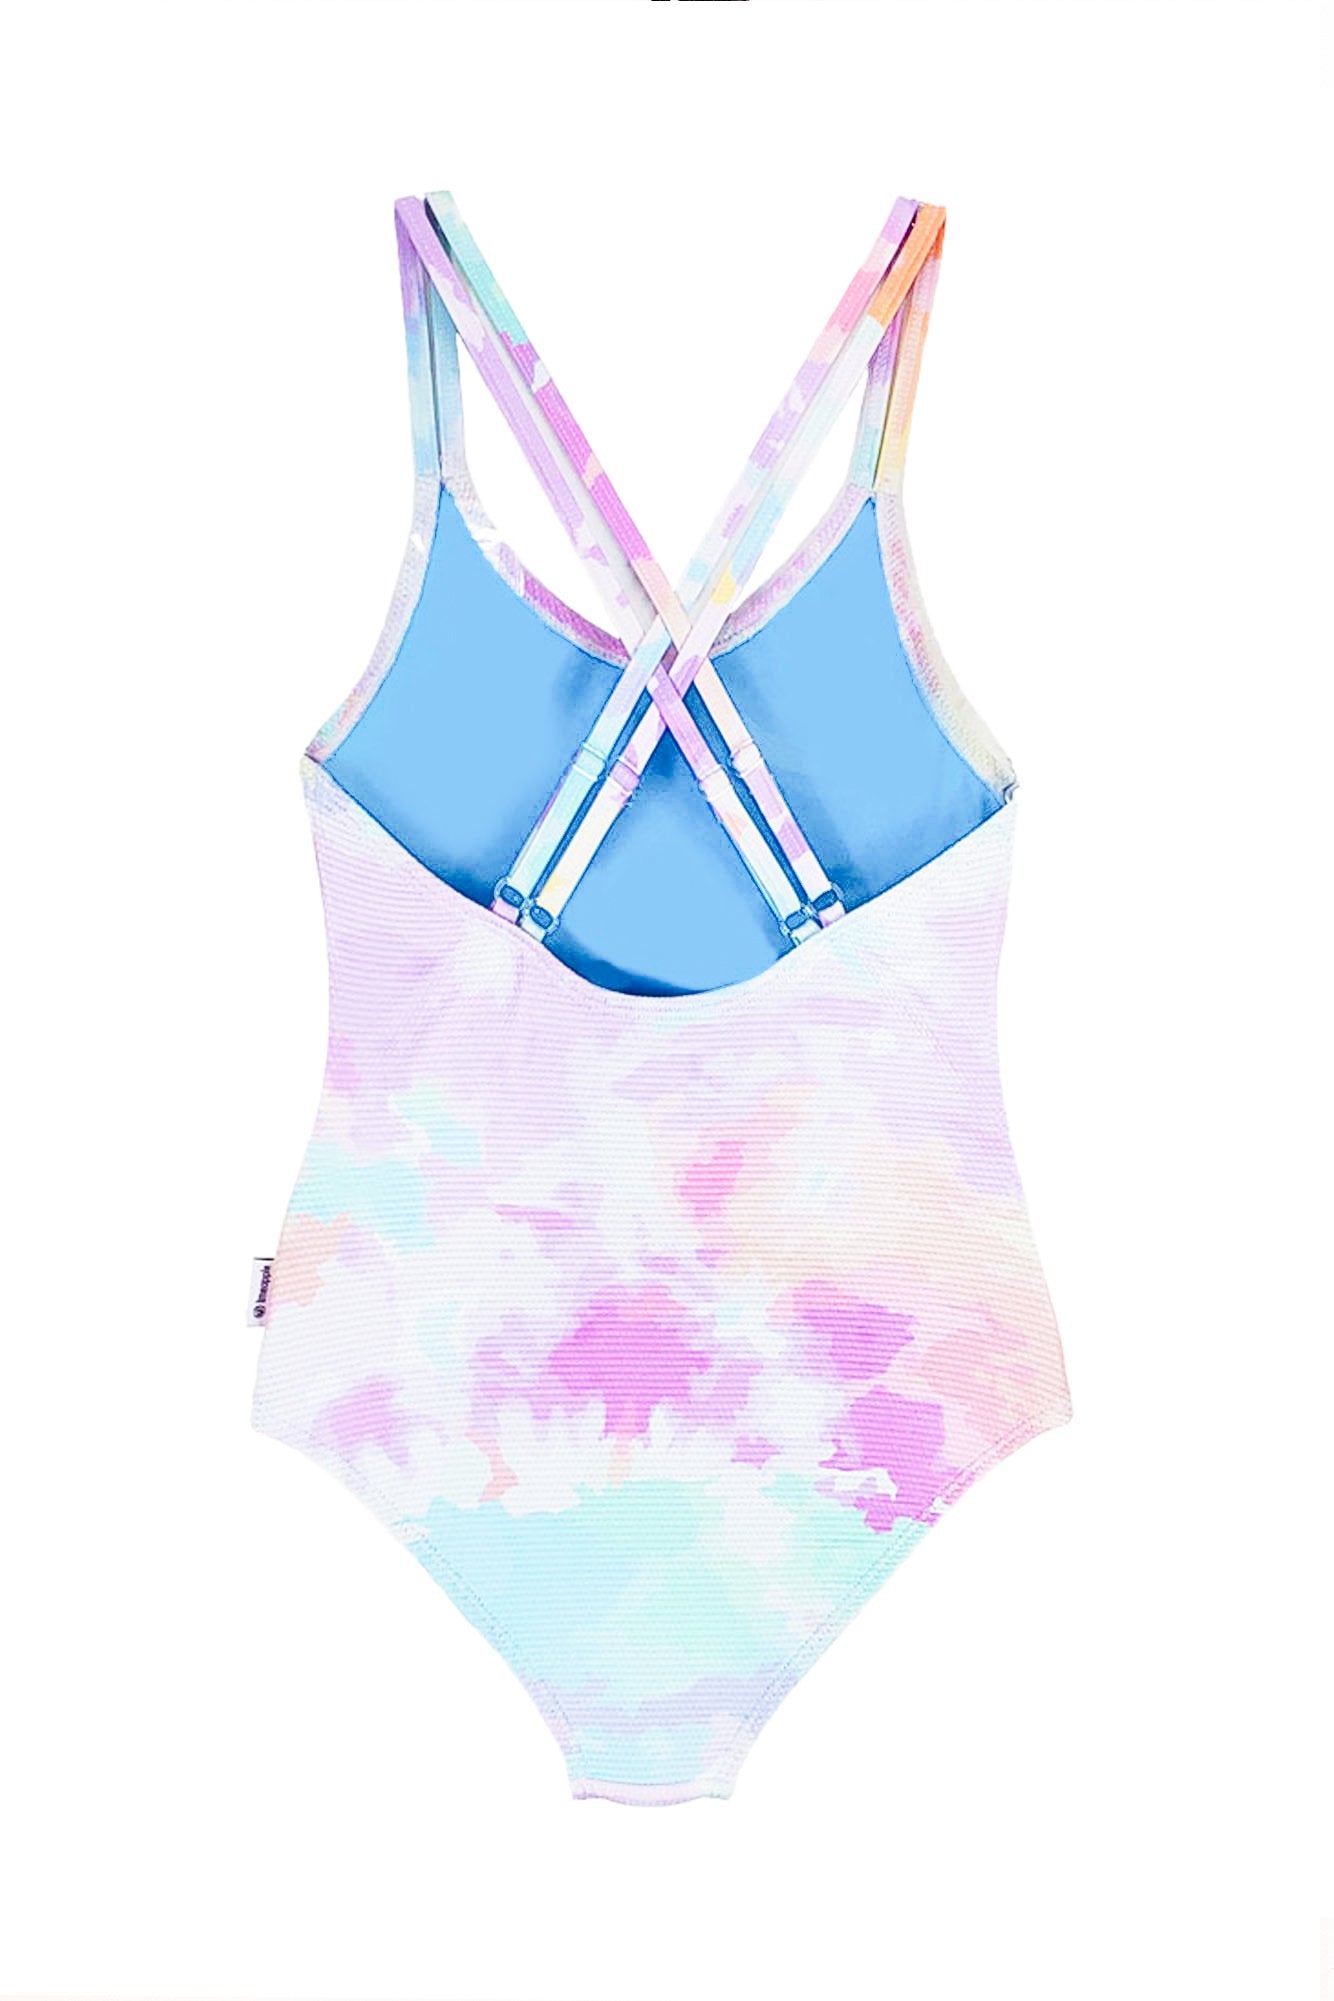 Pastel Watercolor One PC Swimsuit